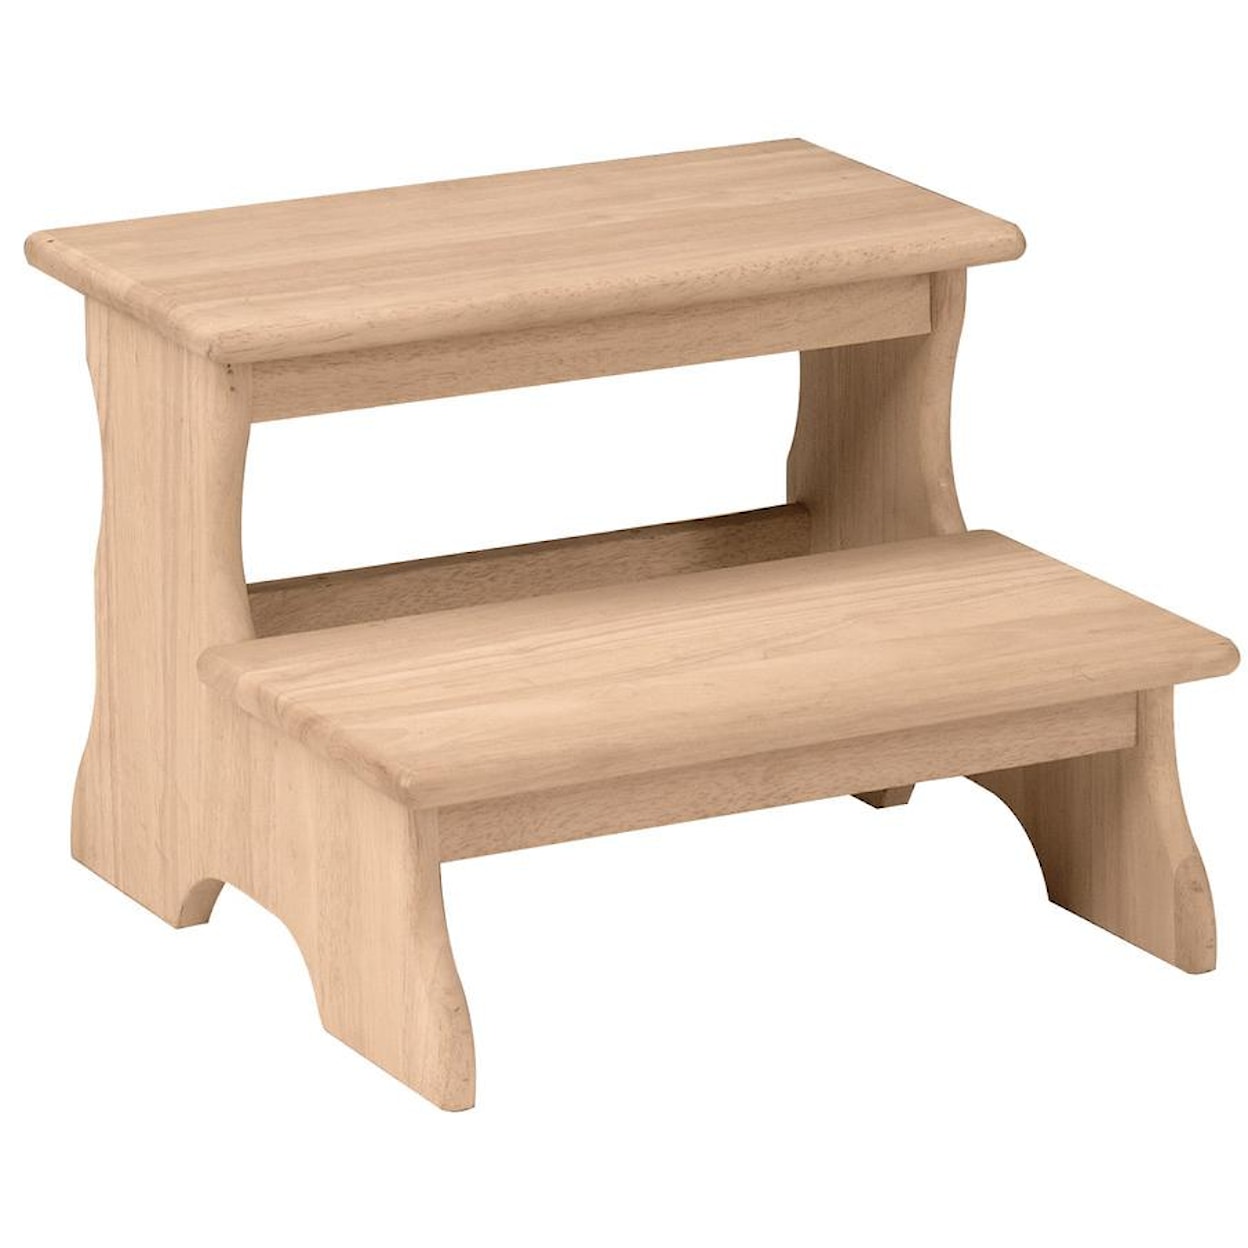 John Thomas SELECT Occasional & Accents Step Stool